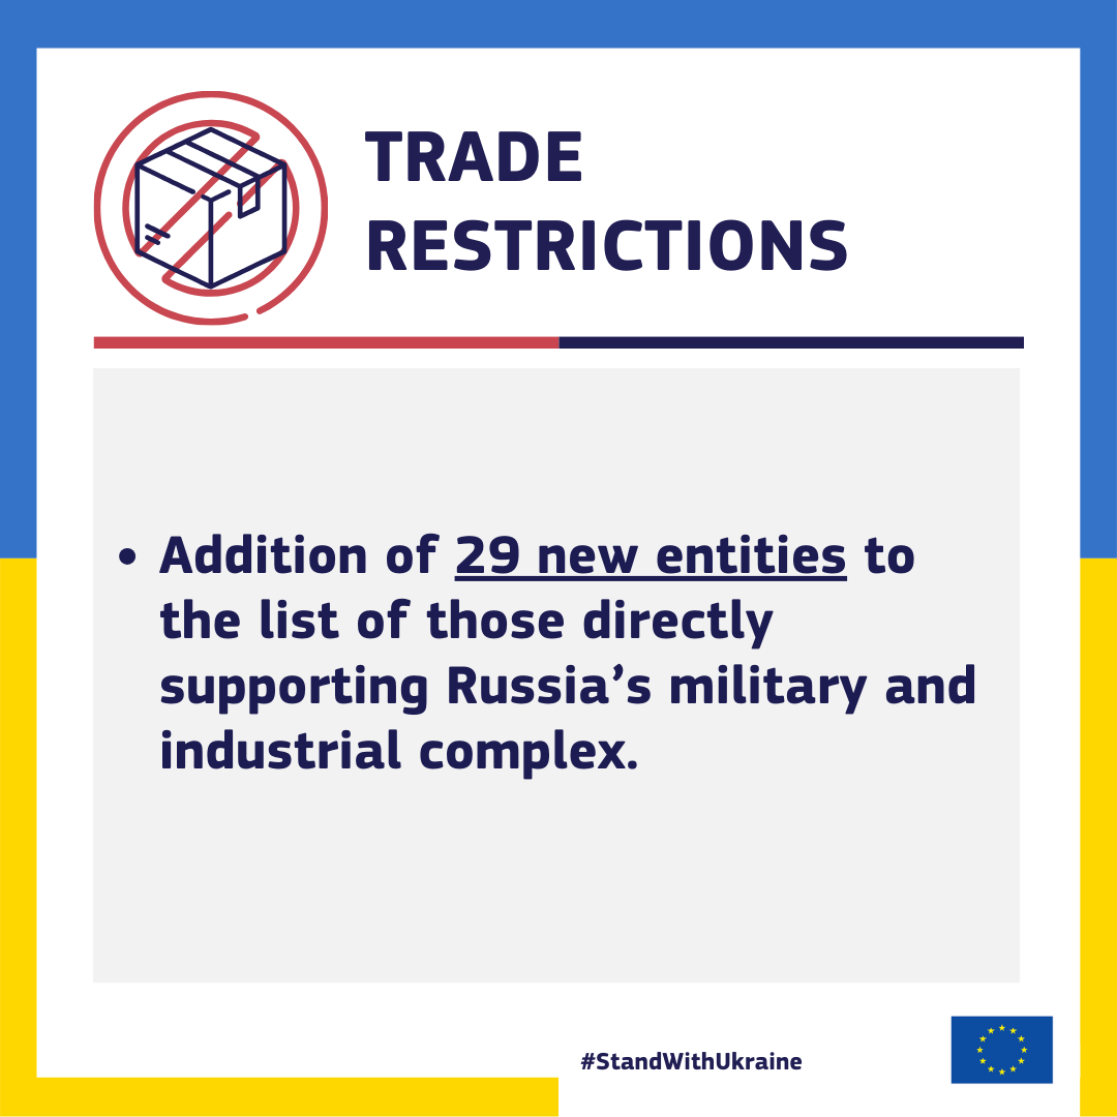 Trade restrictions